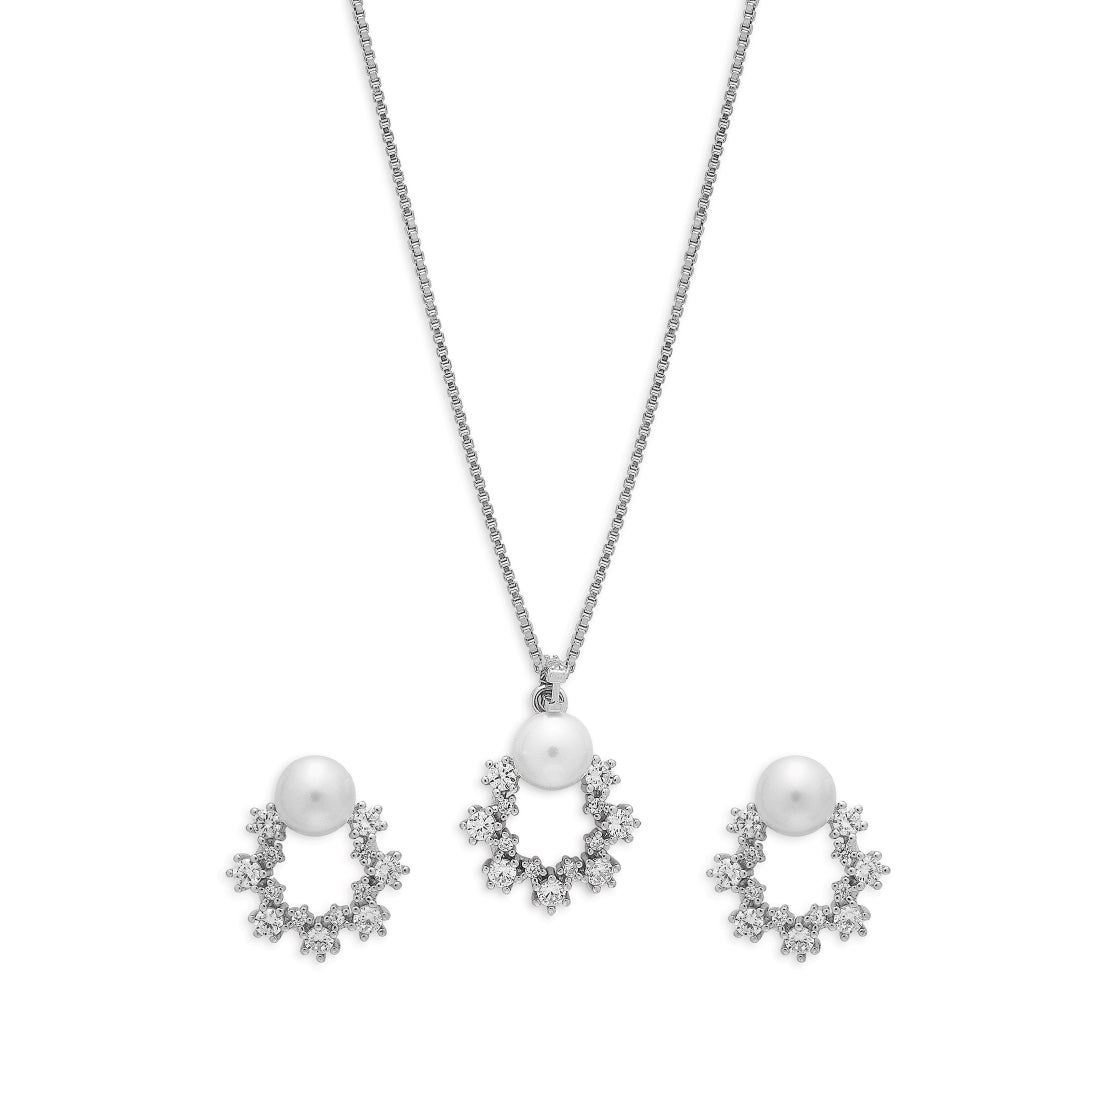 Floral Symphony Ensemble Rhodium-Plated 925 Sterling Silver Jewelry Set